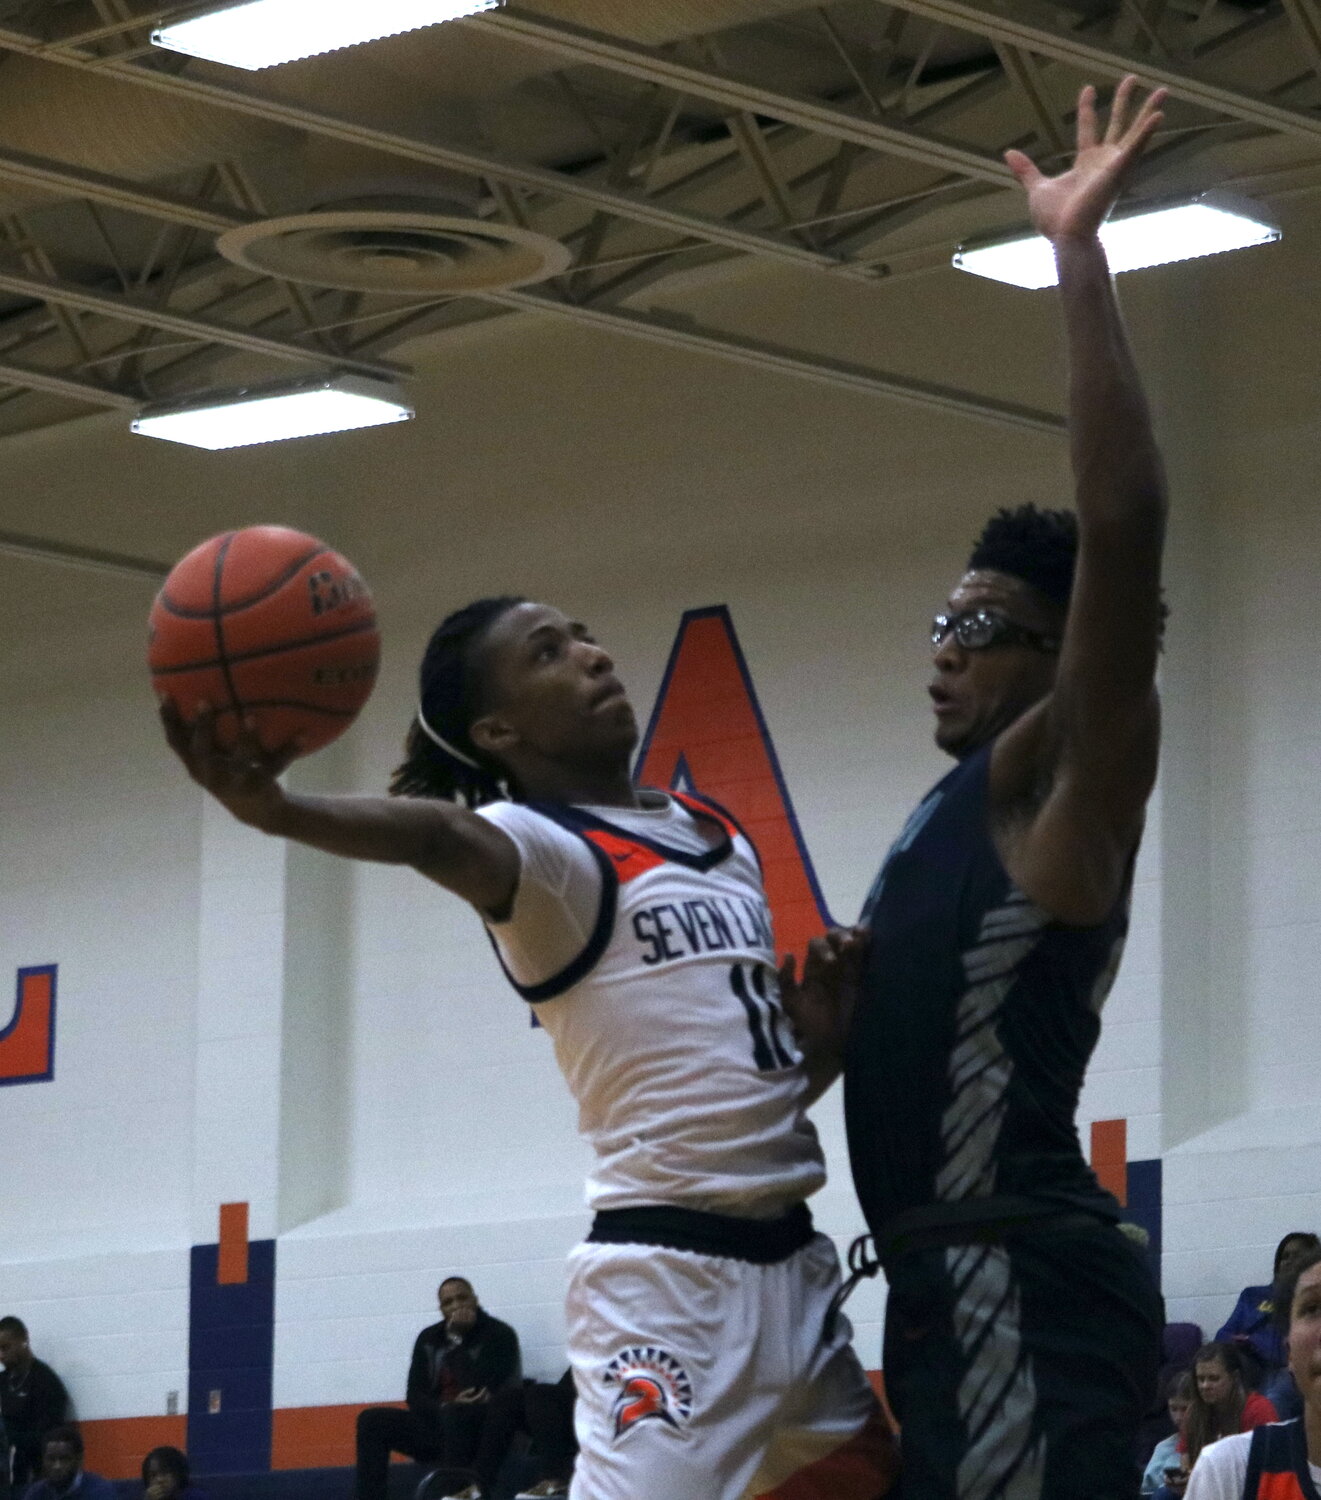 Nasir Price shoots a layup over a defender during Monday's game between Seven Lakes and Pearland Dawson at the Seven Lakes gym.